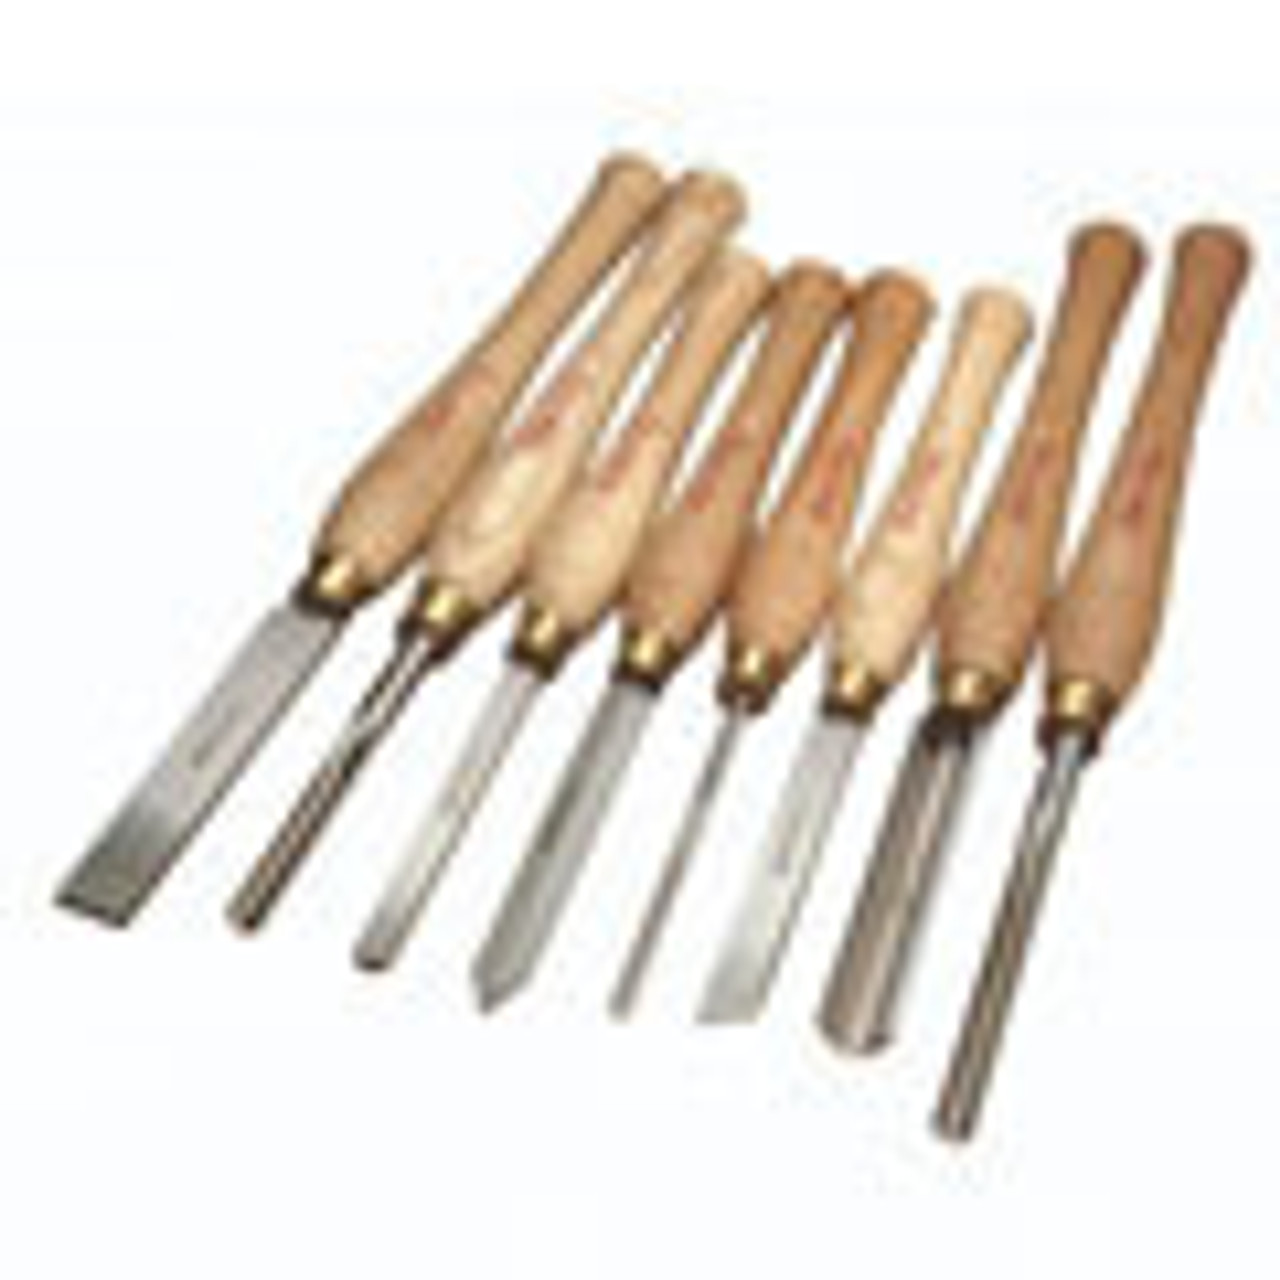 Wood Turning and Carving Tools